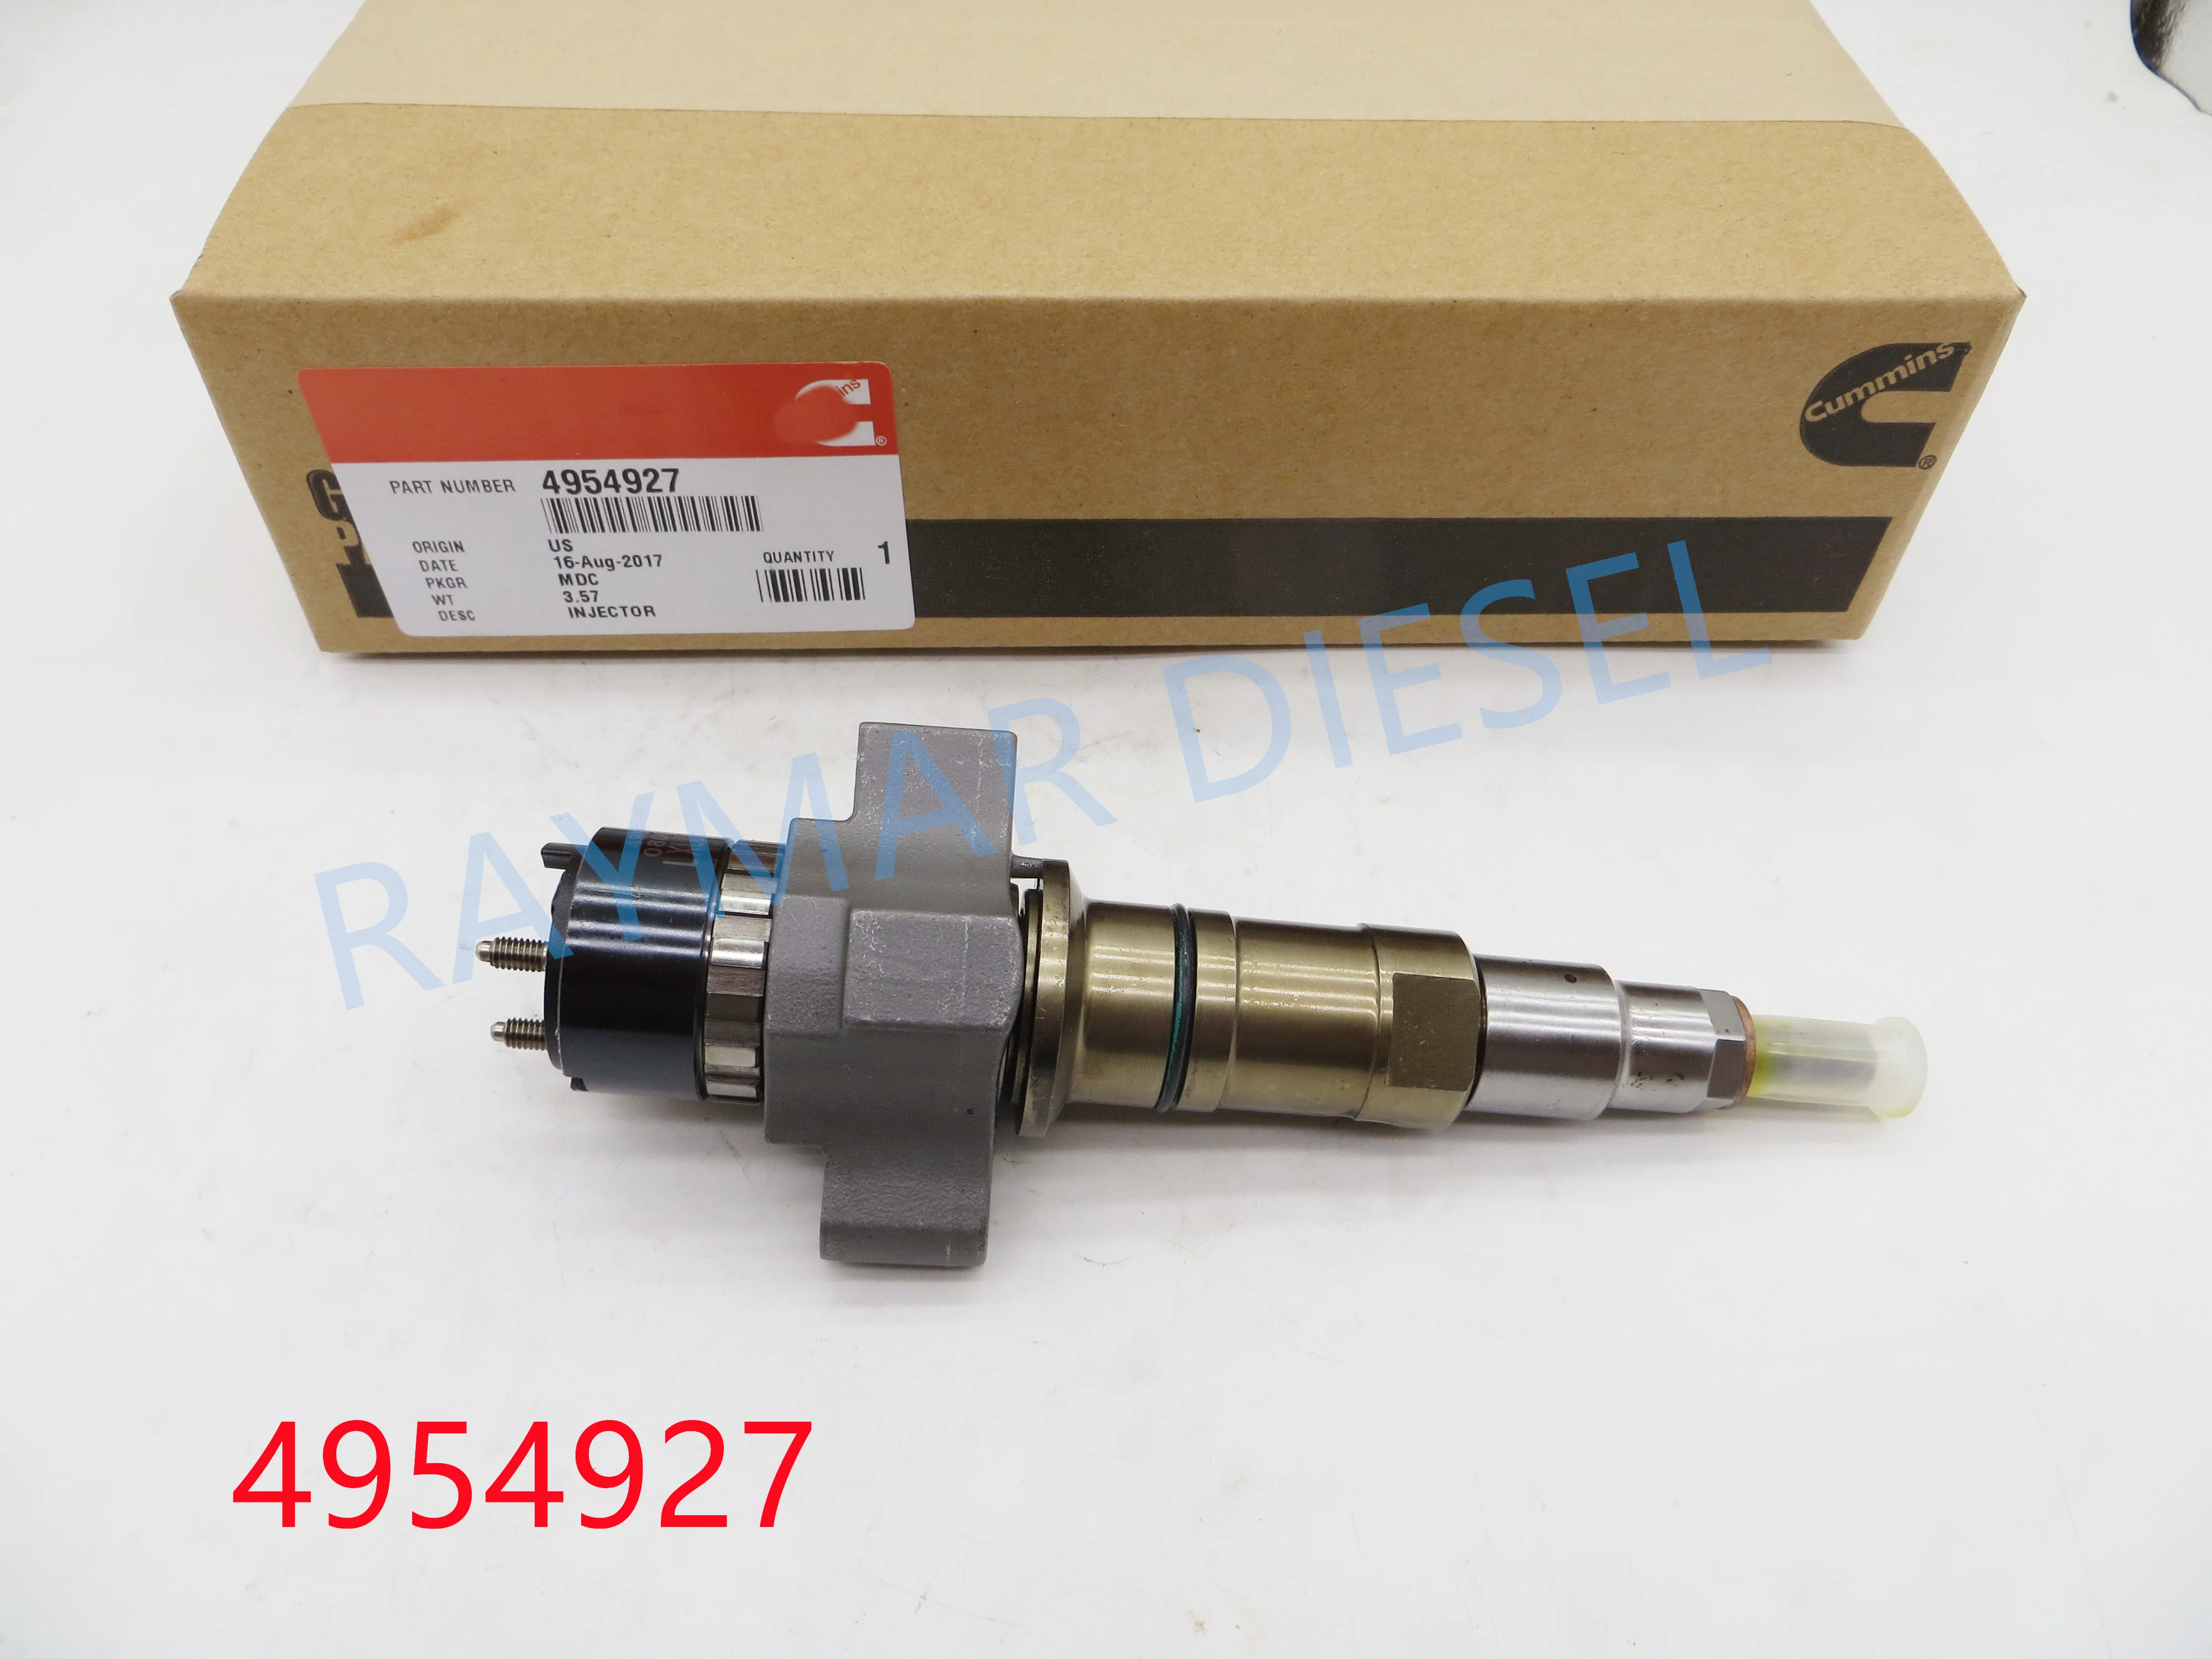 

GENUINE BRAND DIESEL FUEL INJECTOR 4954927 4984332 2872127 FOR ISC, ISL, QSL, QSC ENGINE